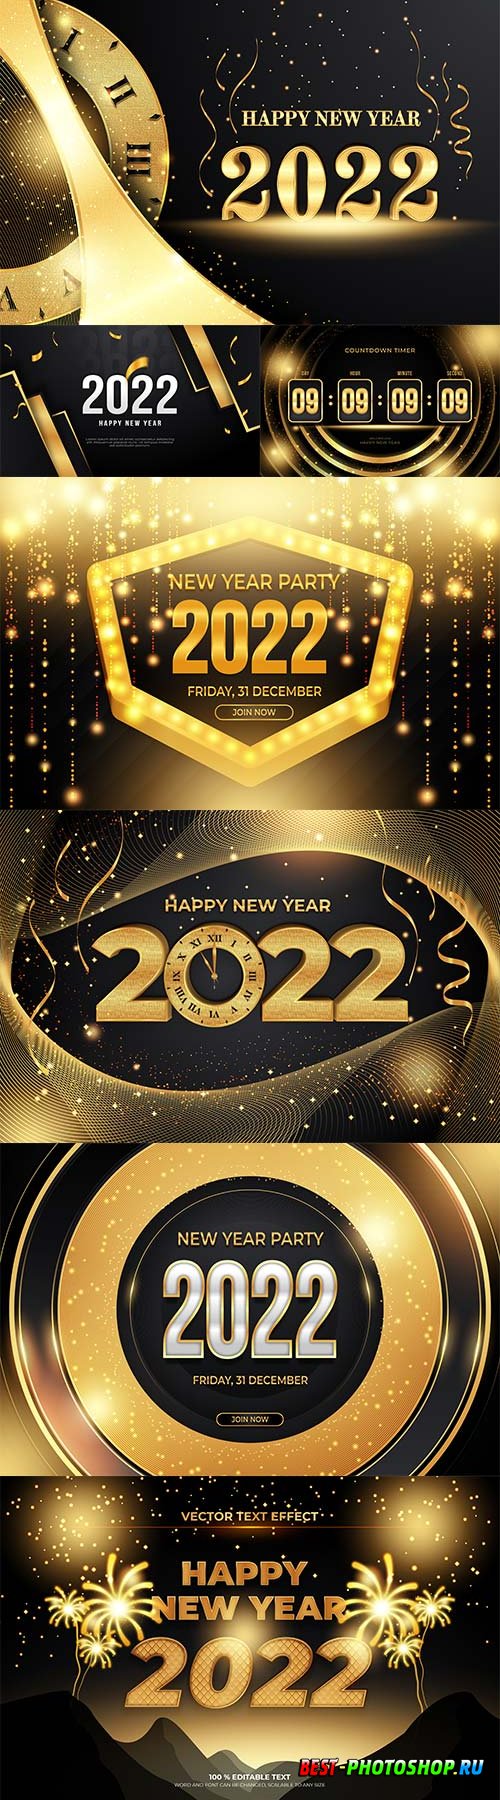 Happy new year editable text effect with black gold backround style premium vector